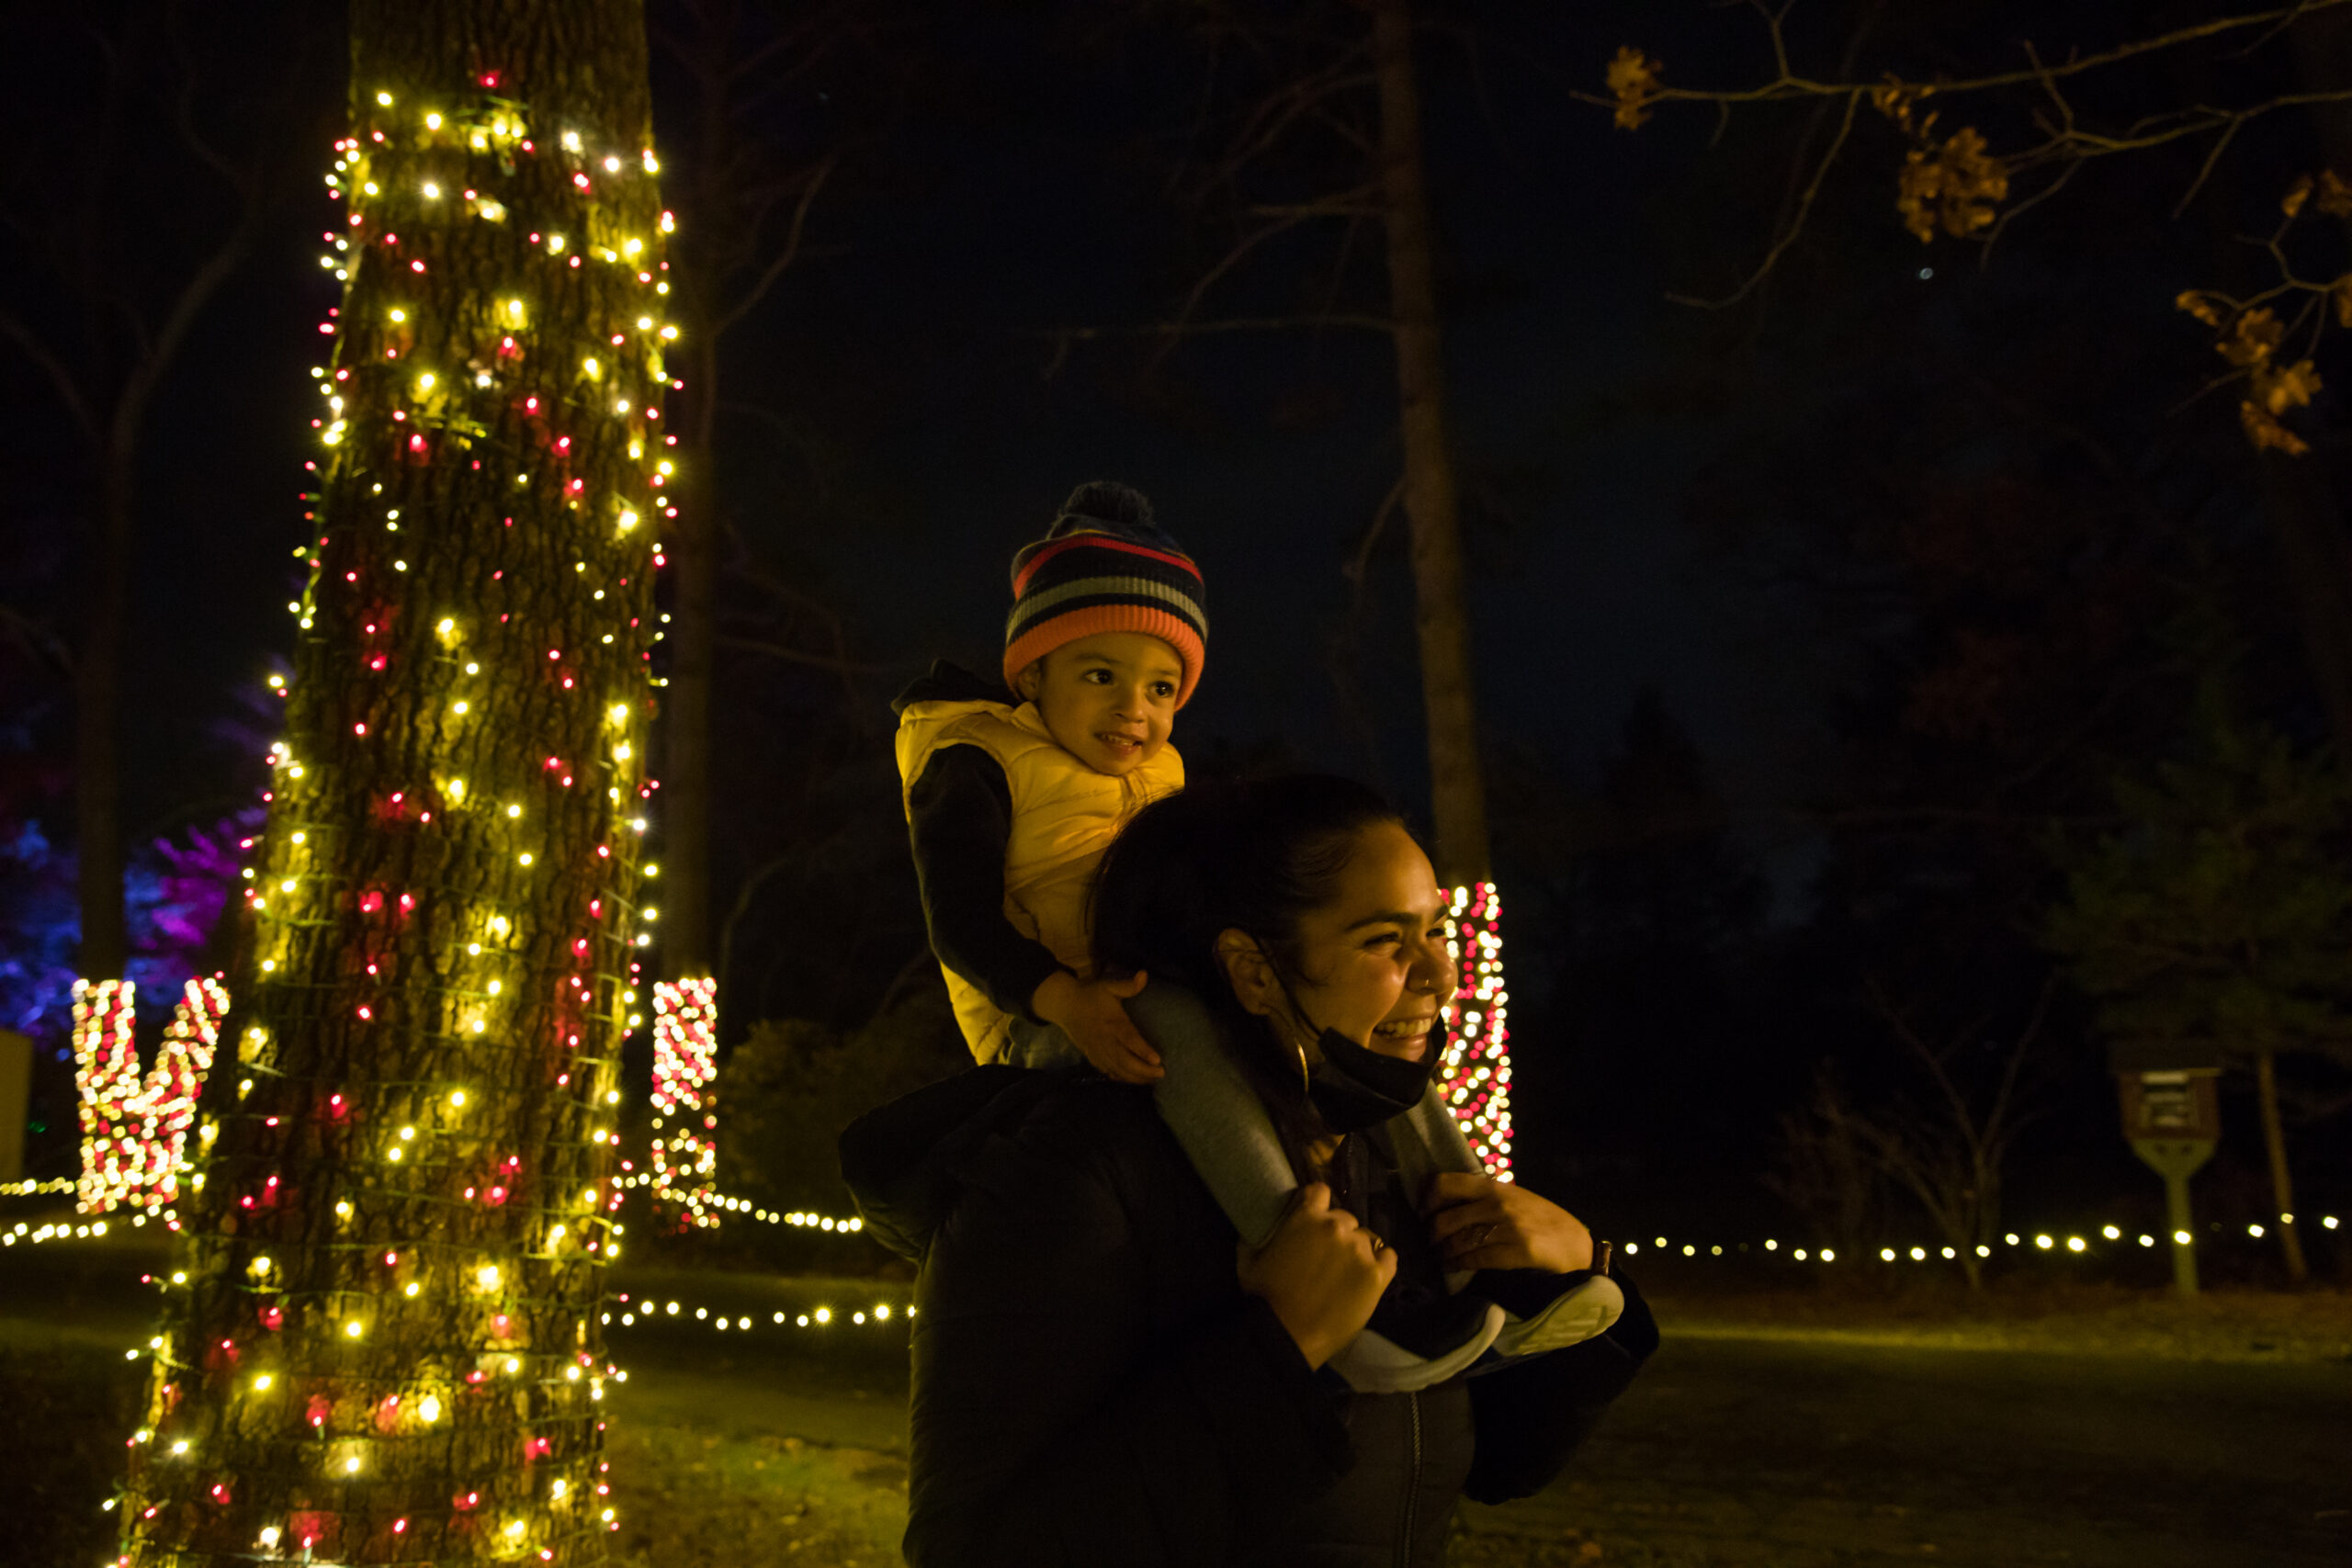 A woman walking with a toddler on her shoulders between trees wrapped in holiday lights at Winterlights